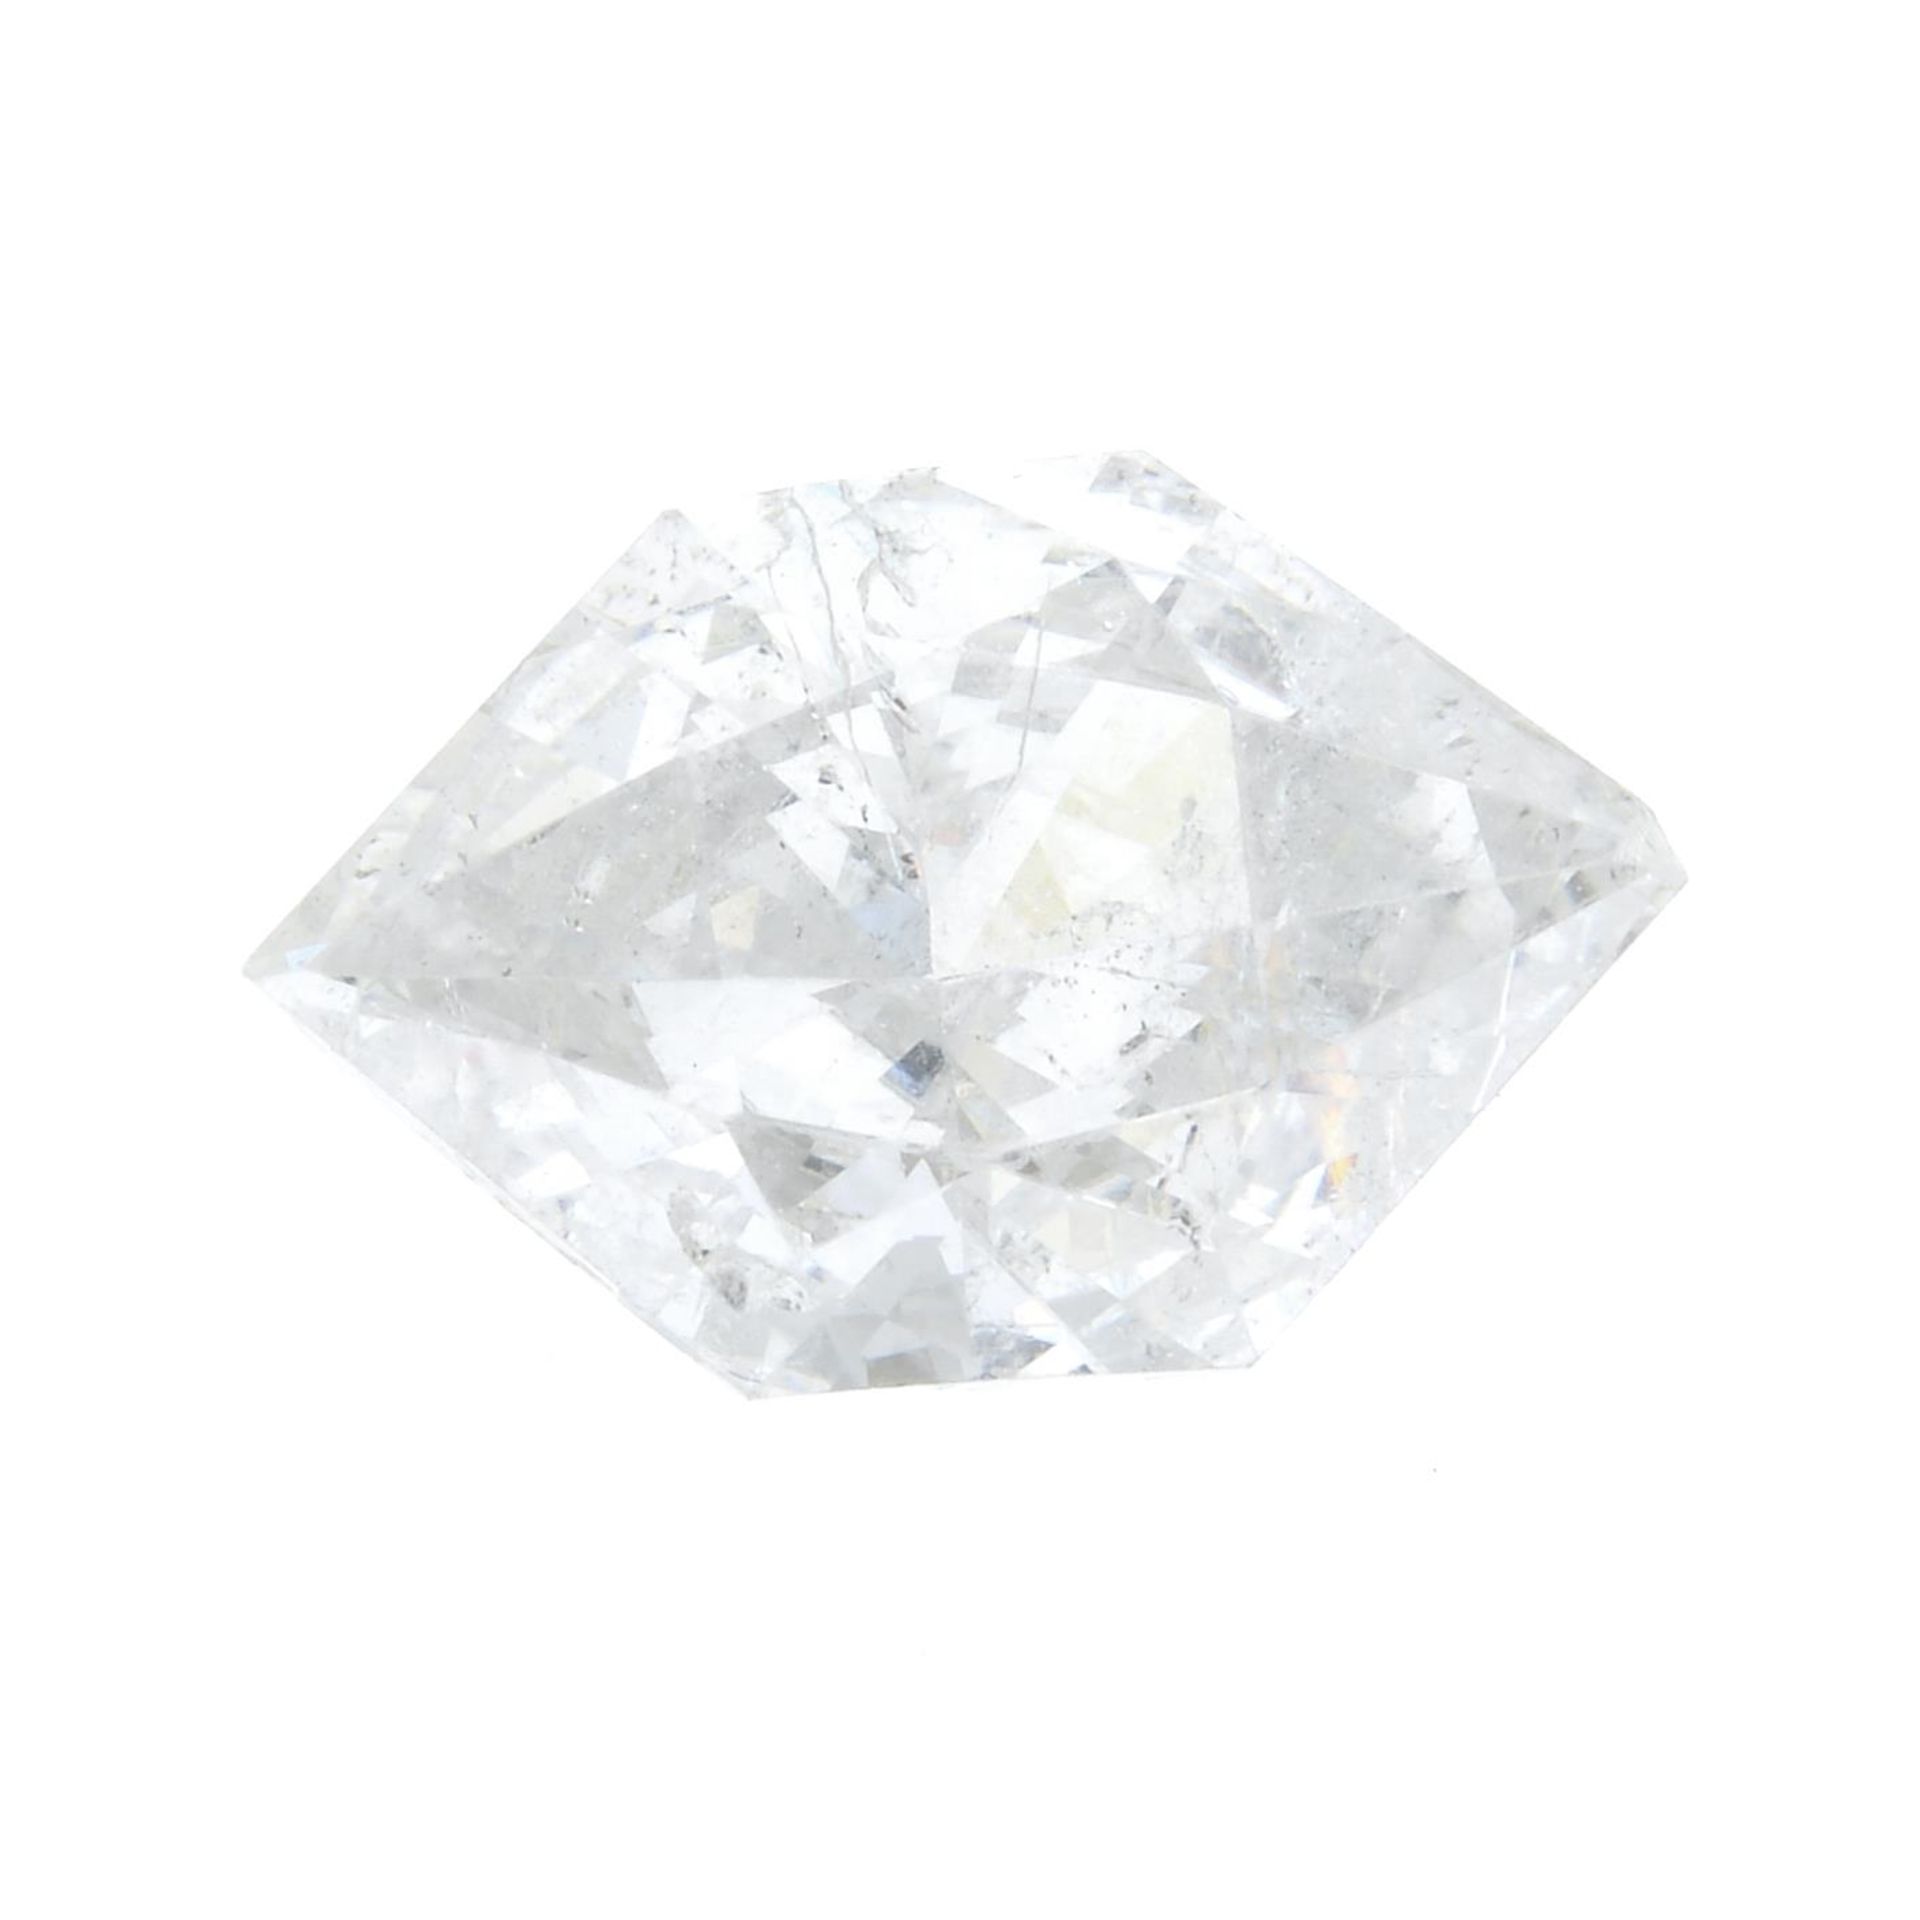 A fancy-shape diamond, weighing 0.92cts.